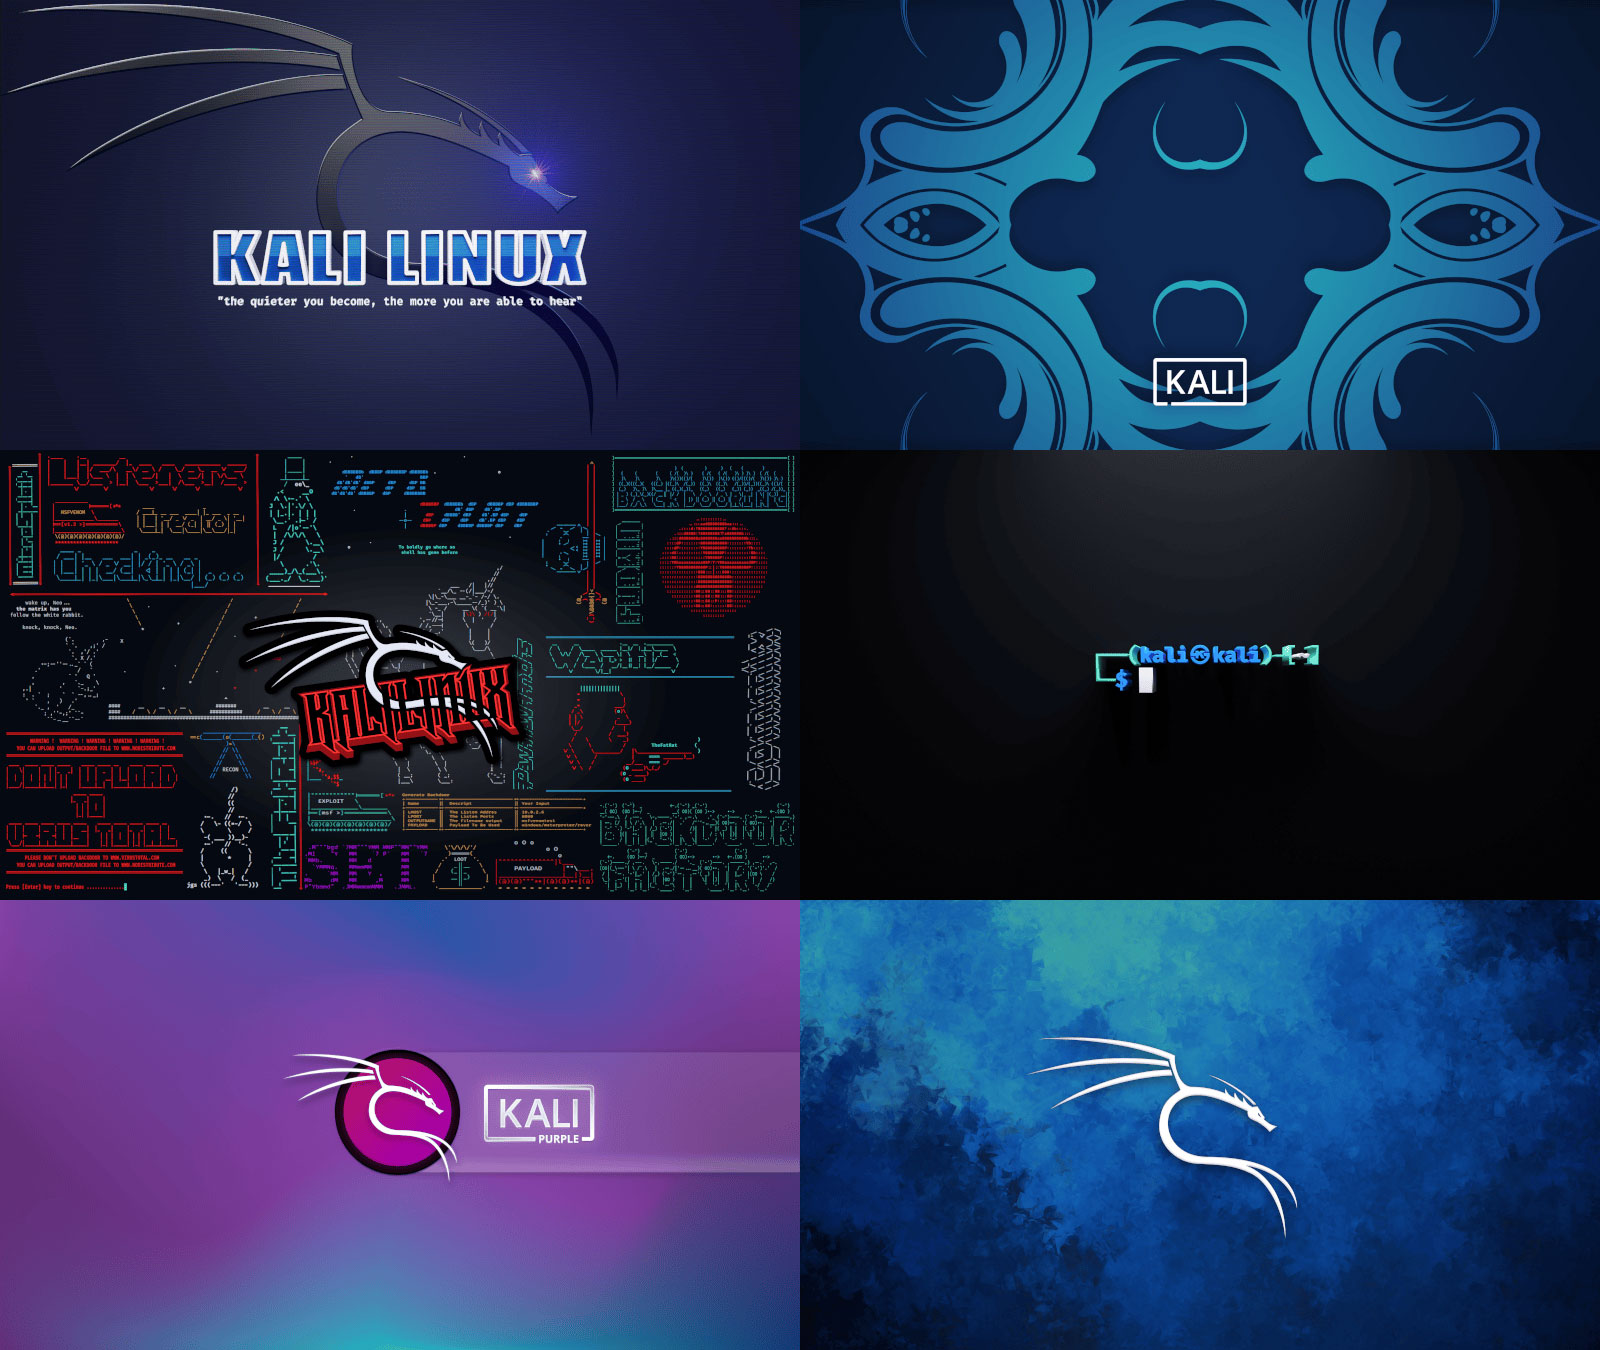 New Kali Linux wallpapers